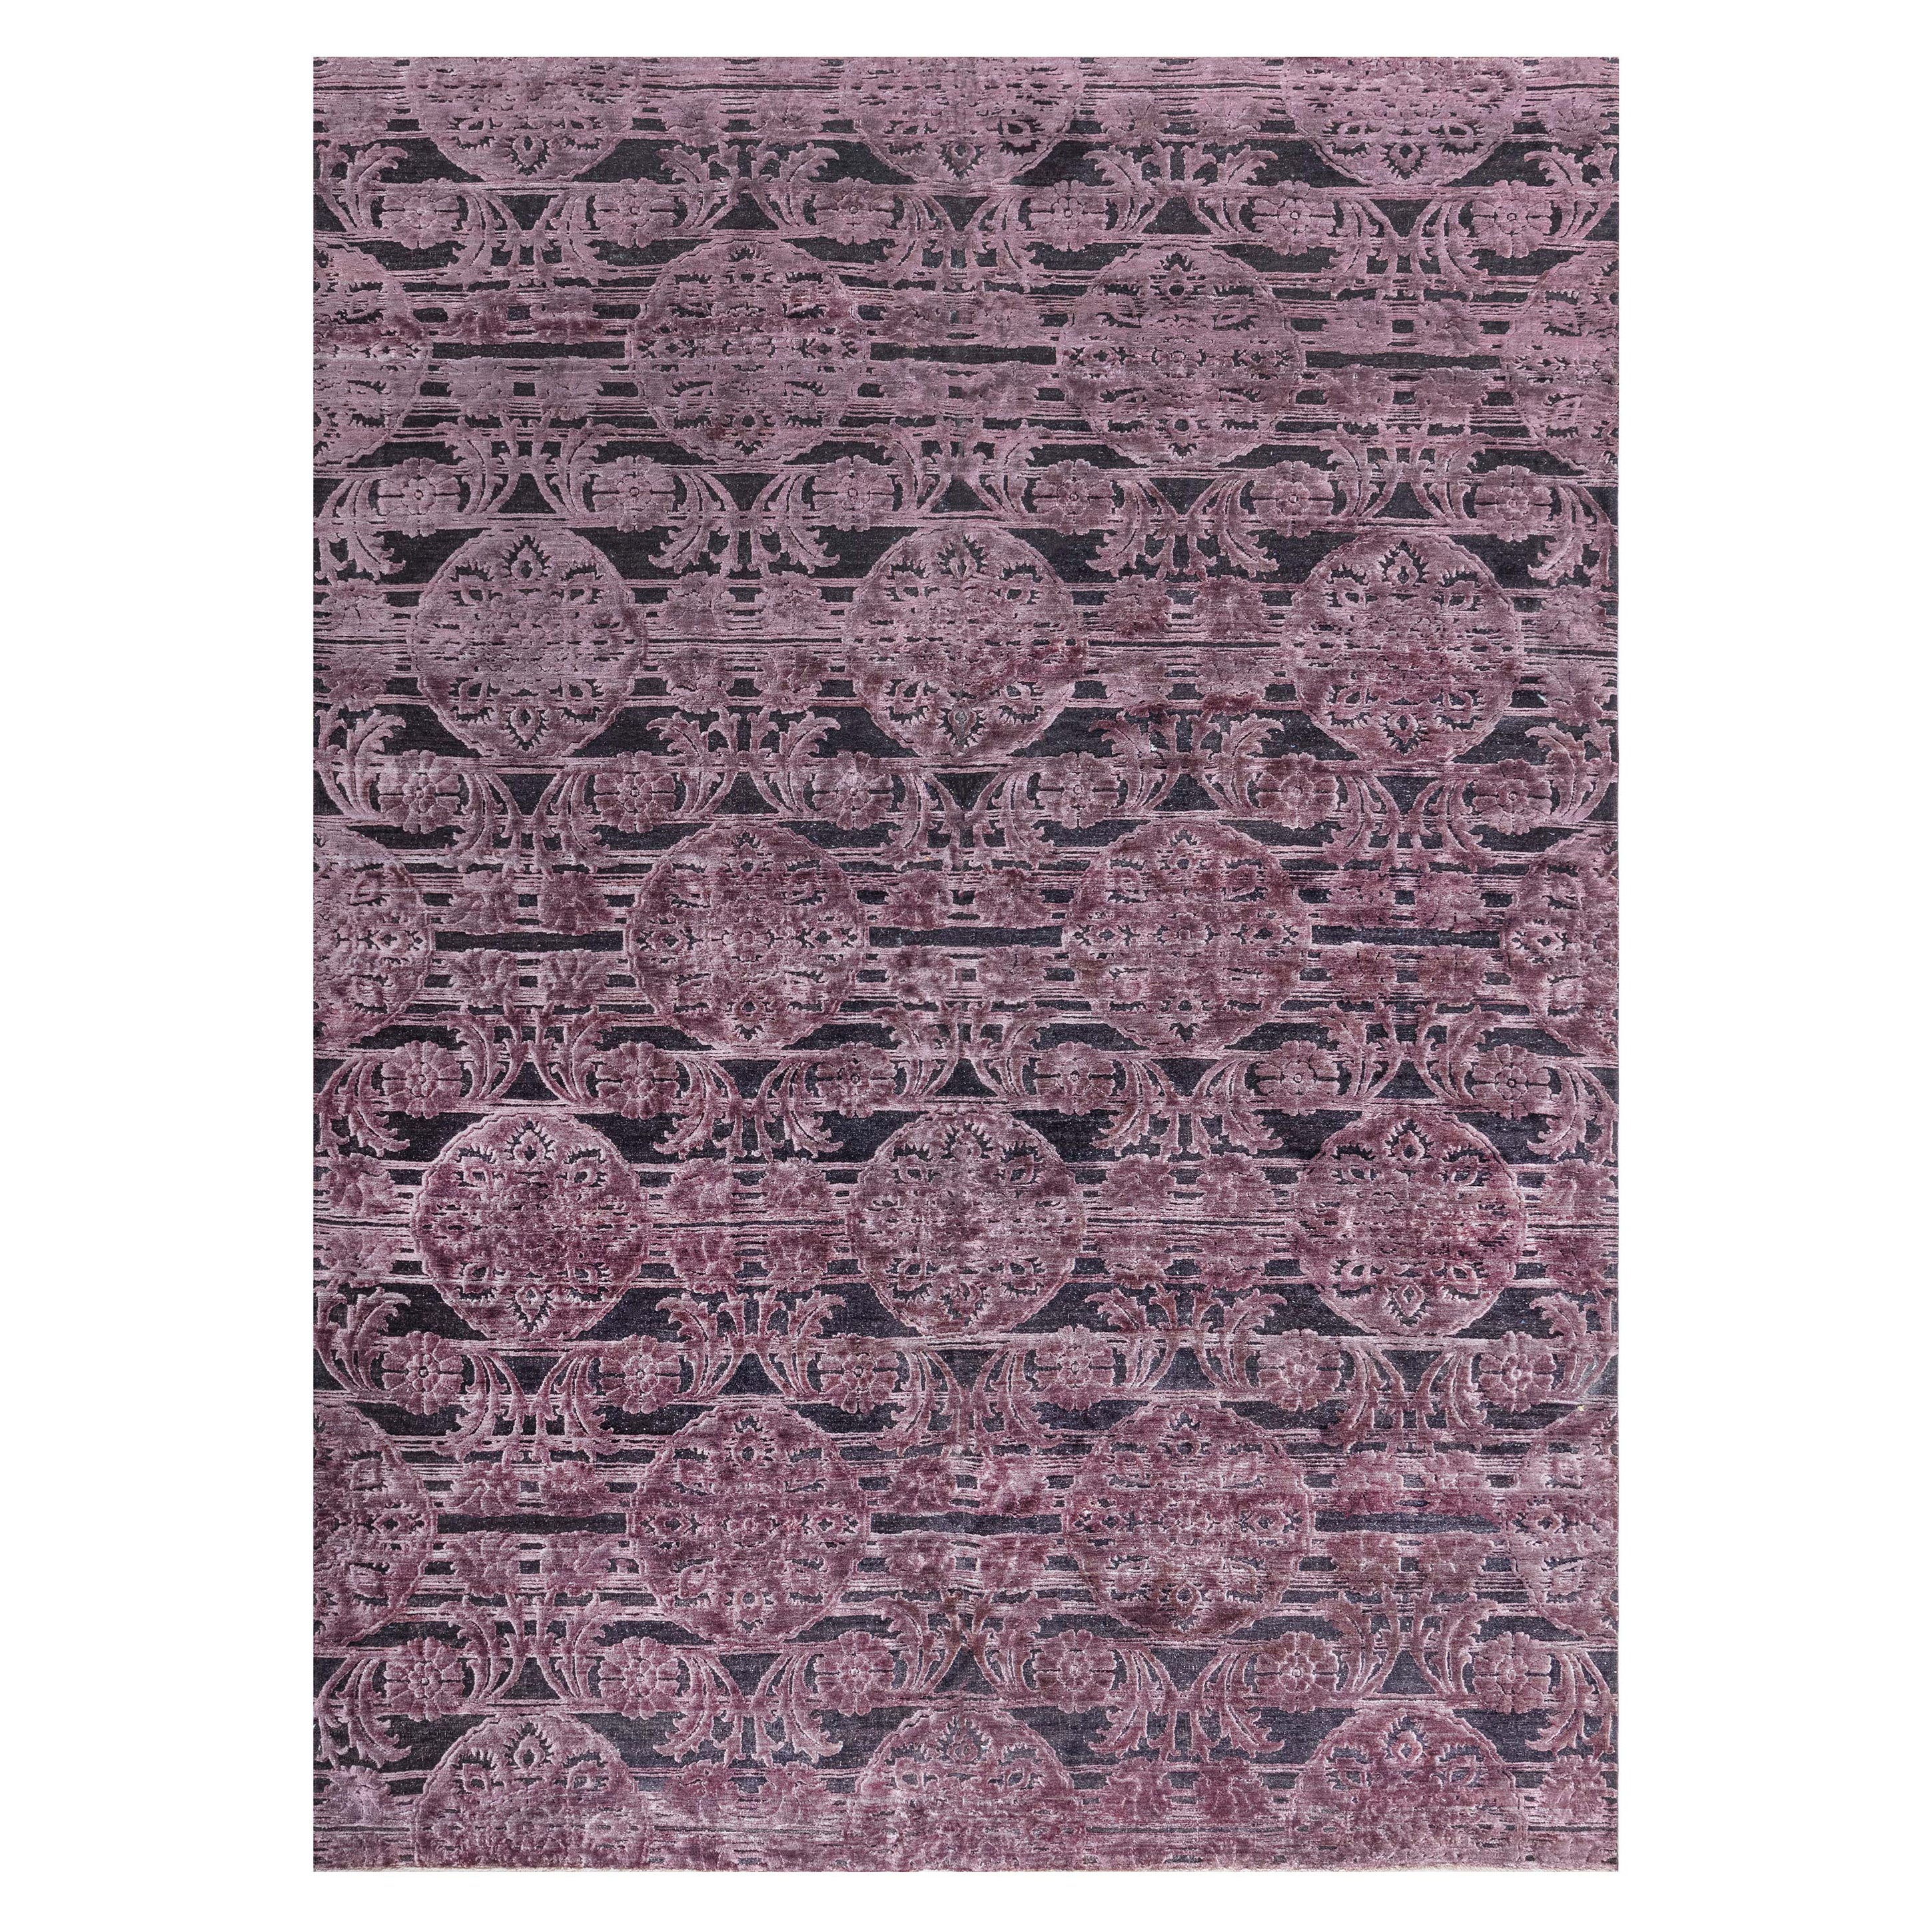 Contemporary Indian Handwoven Silk and Wool Rug by Doris Leslie Blau